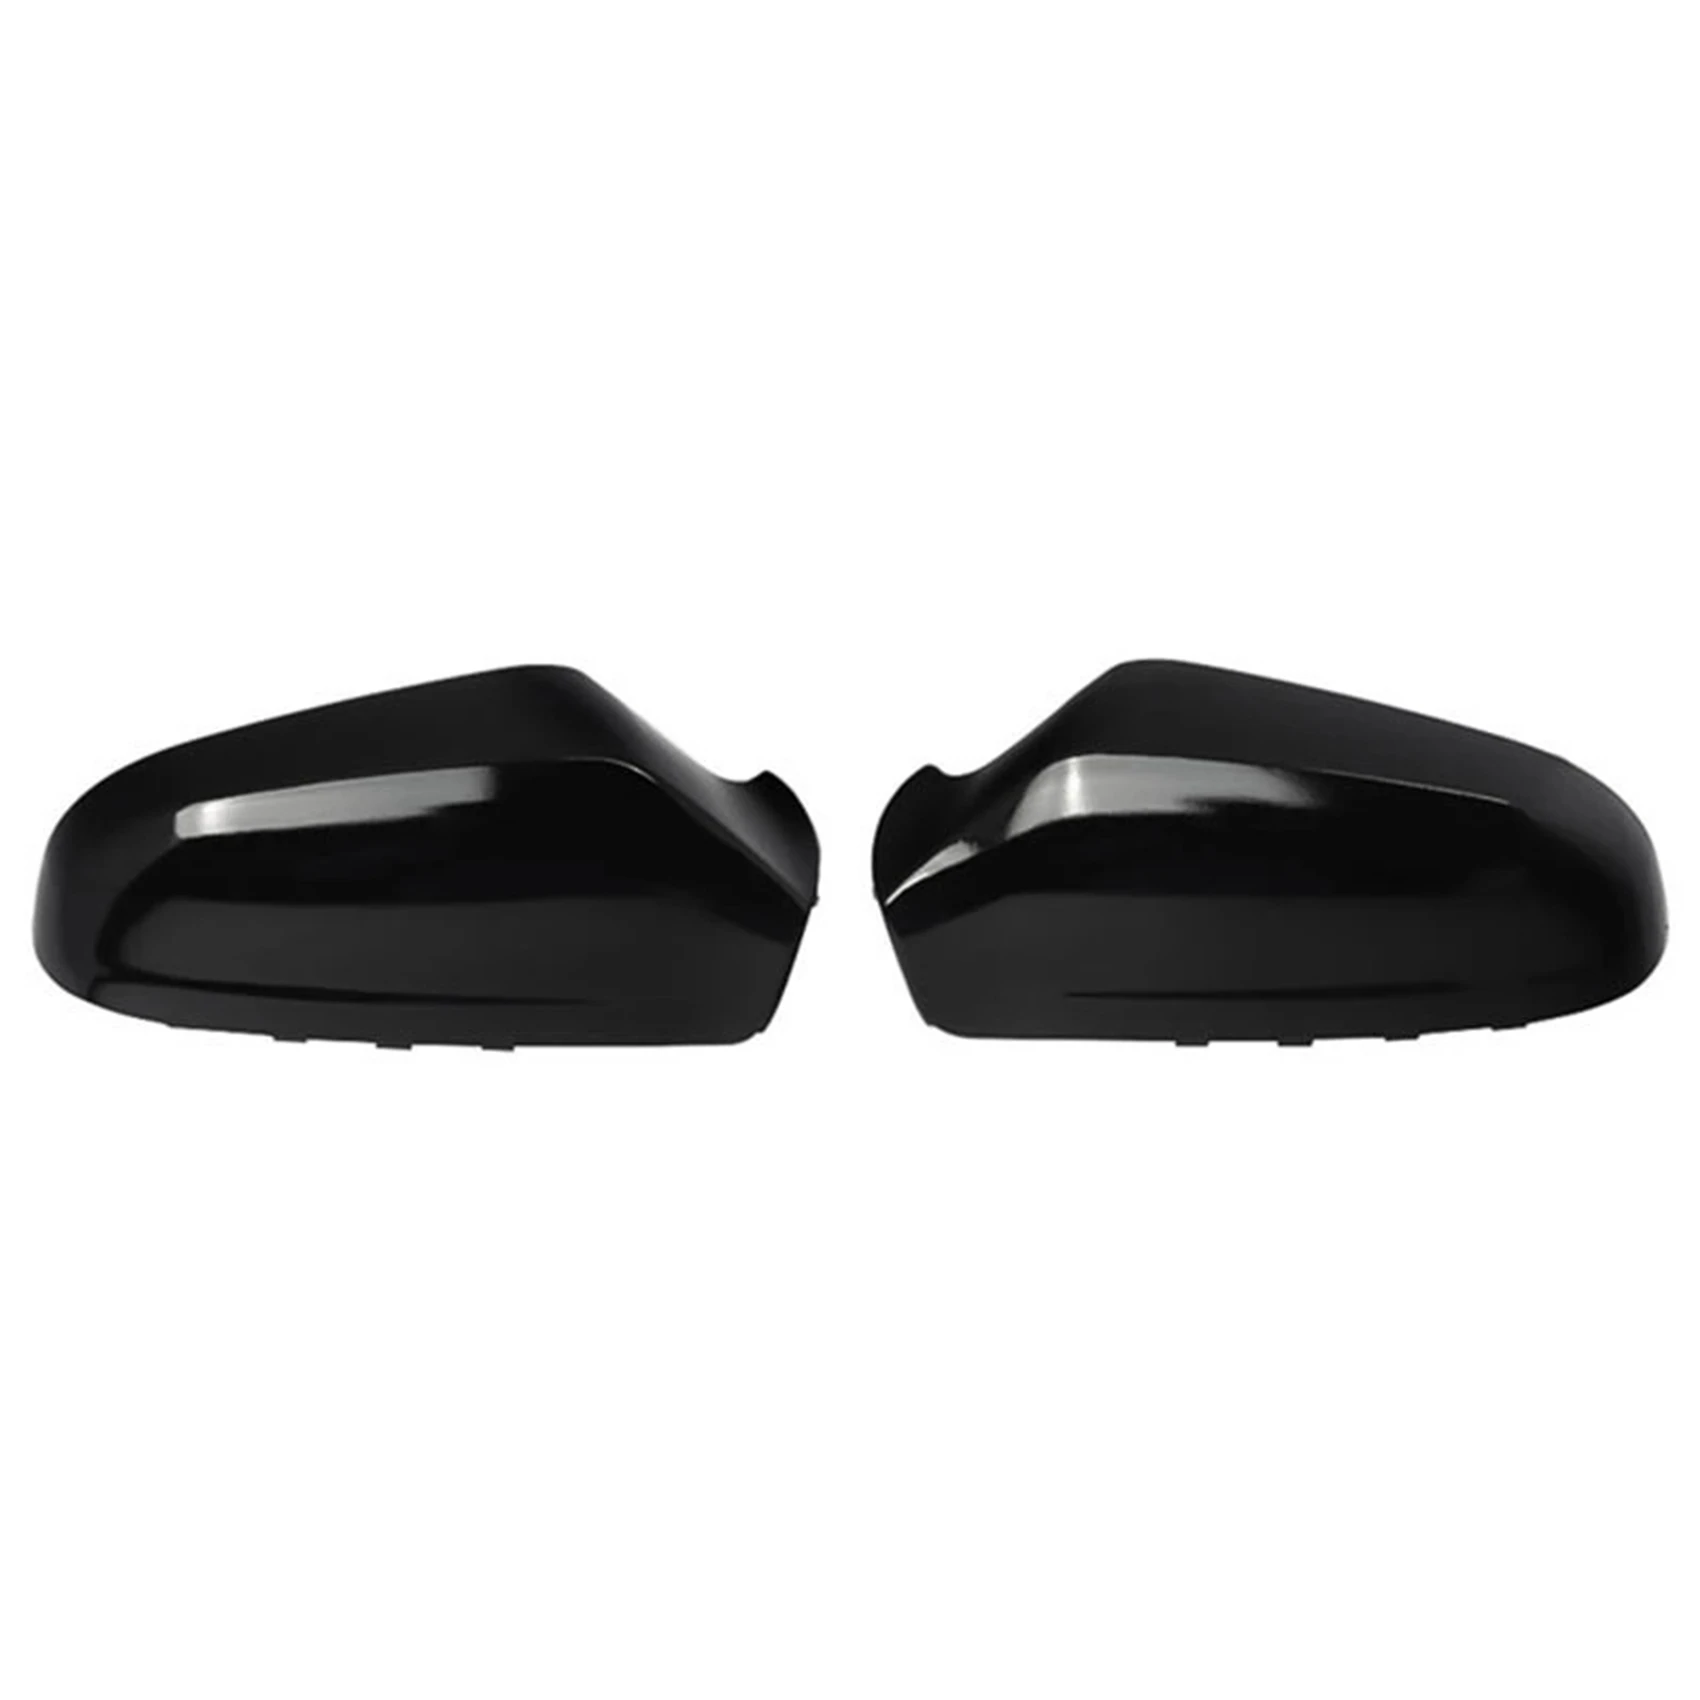 2PCS Car Rearview Mirror Cover Cap Reversing Rear View Mirror Shell for Opel Astra H 2004-2009